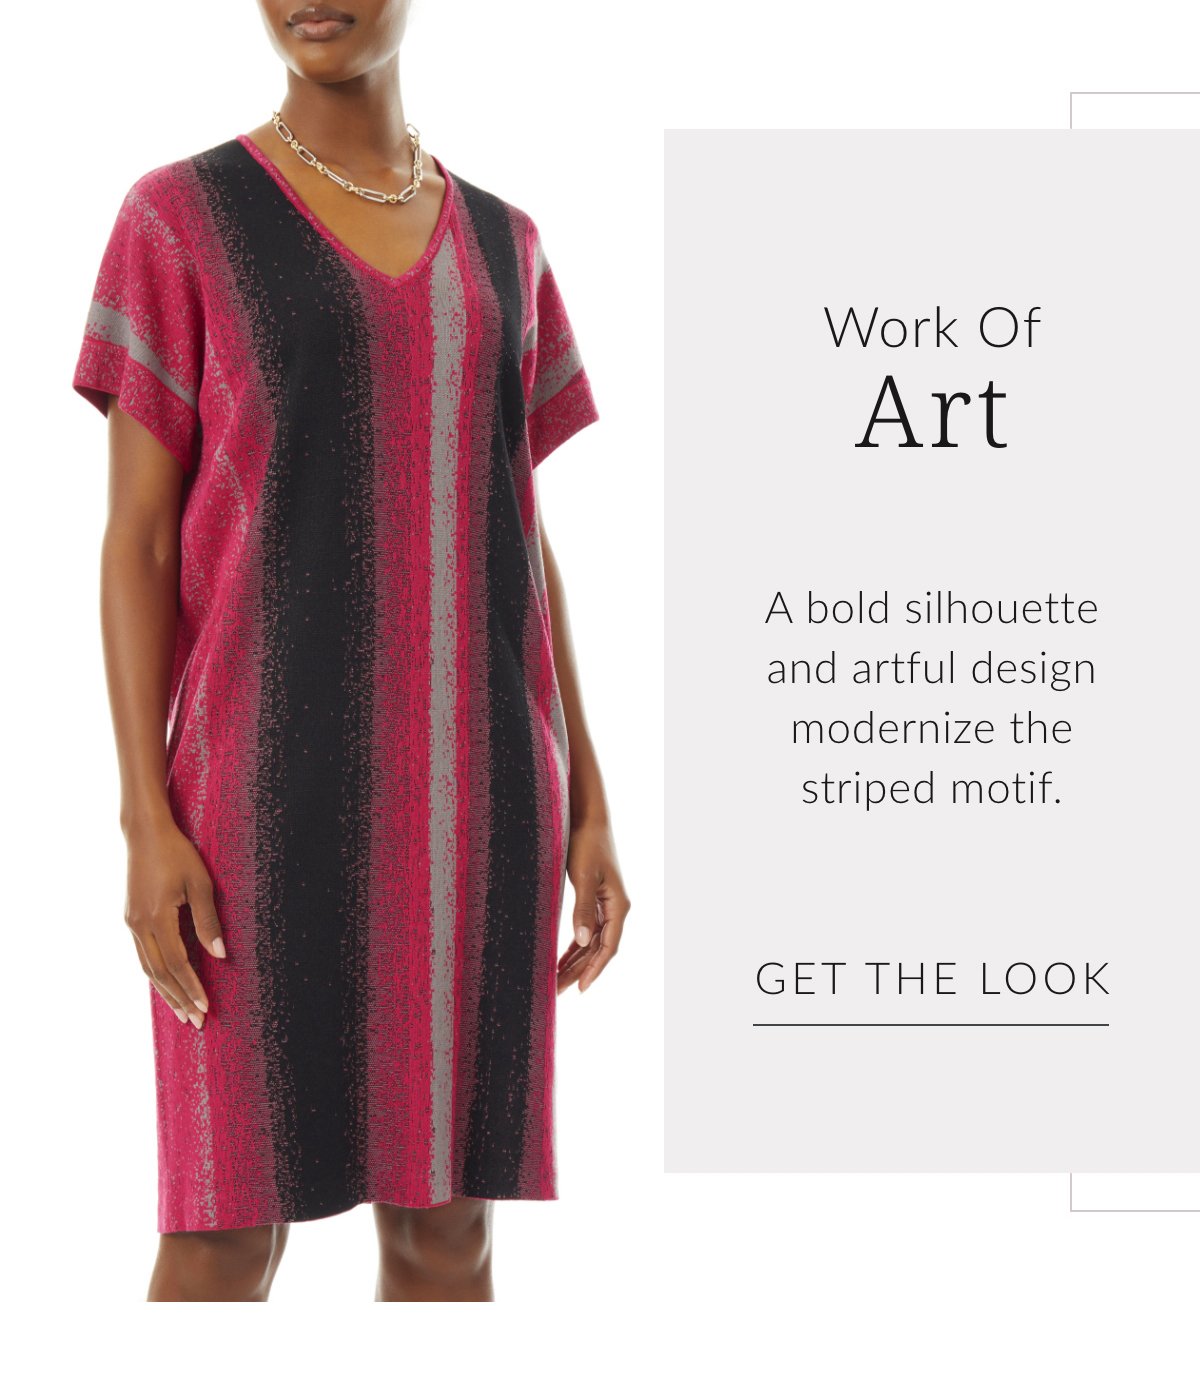 Work of Art - A bold silhouette and artful design modernize the striped motif. Get the Look >>